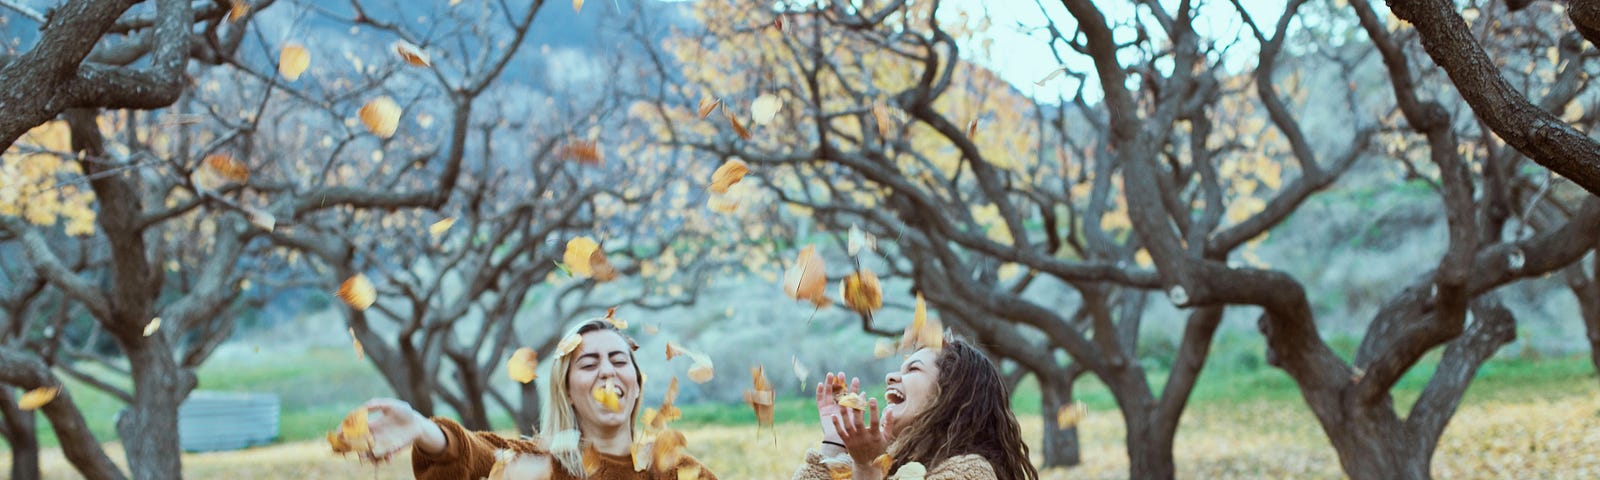 Two youngsters, playful in an orchard with golden leaves all around